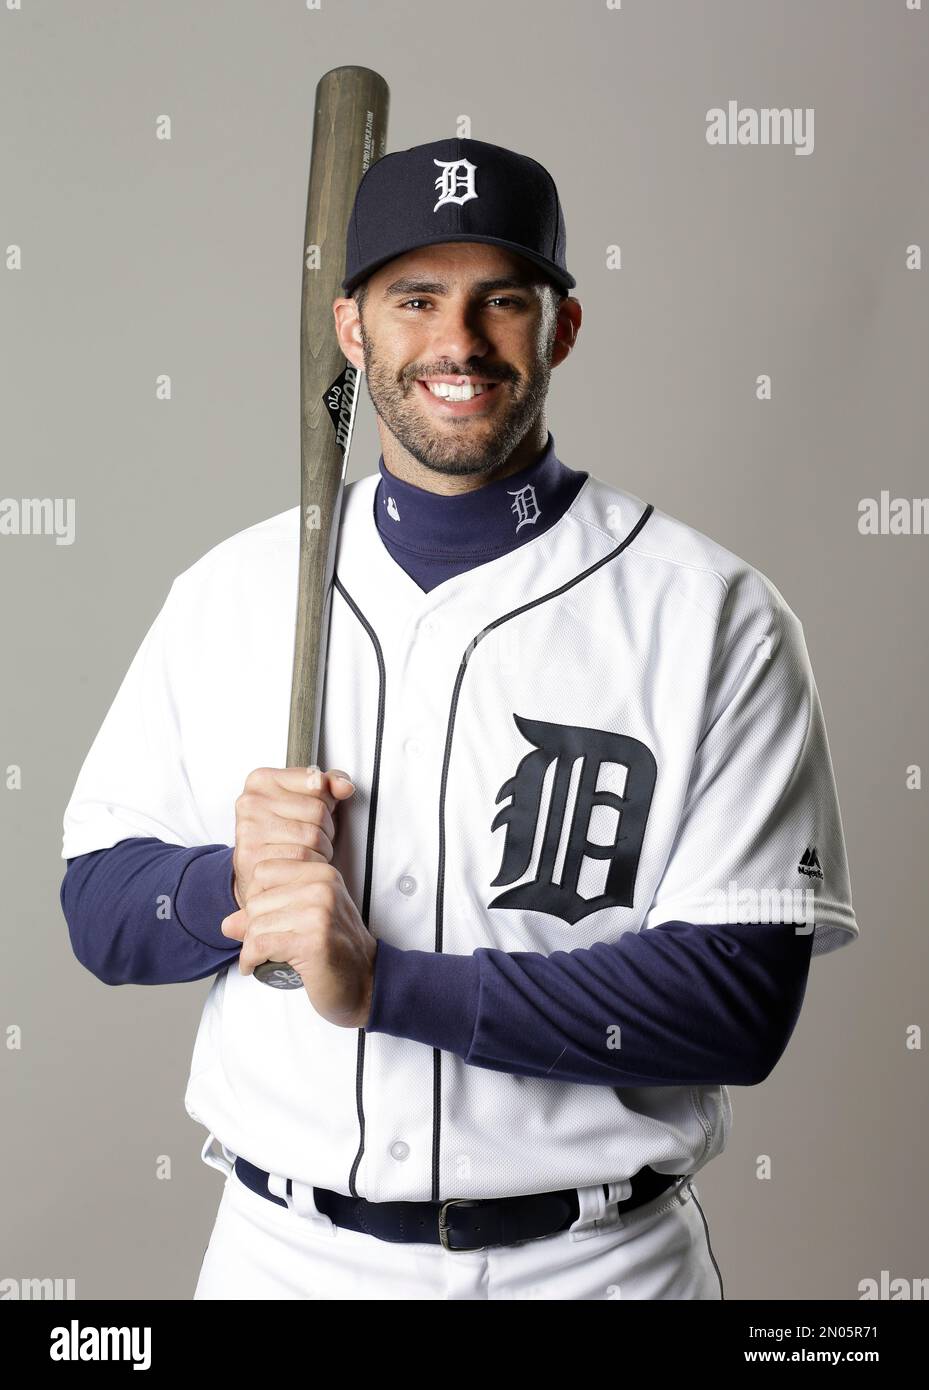 This is a 2016 photo of J.D. Martinez of the Detroit Tigers